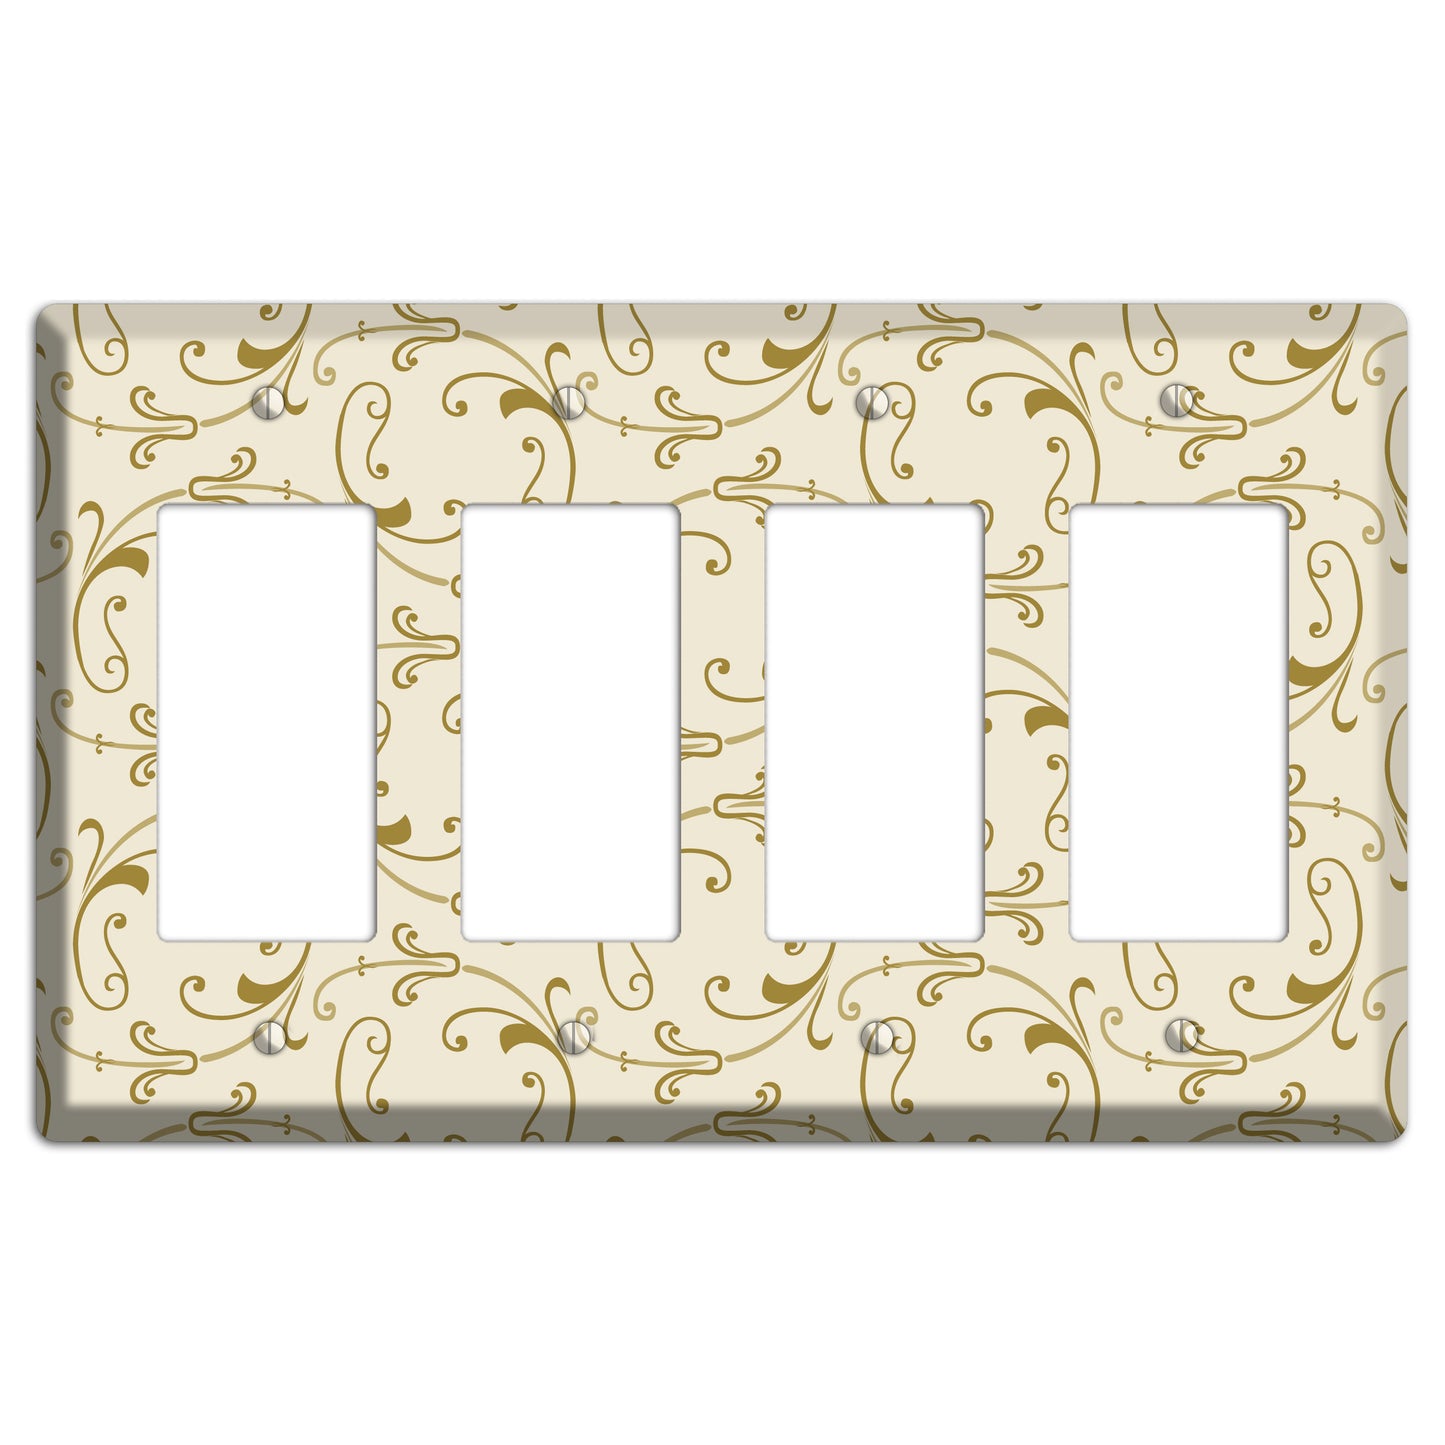 Off White with Gold Victorian Sprig 4 Rocker Wallplate